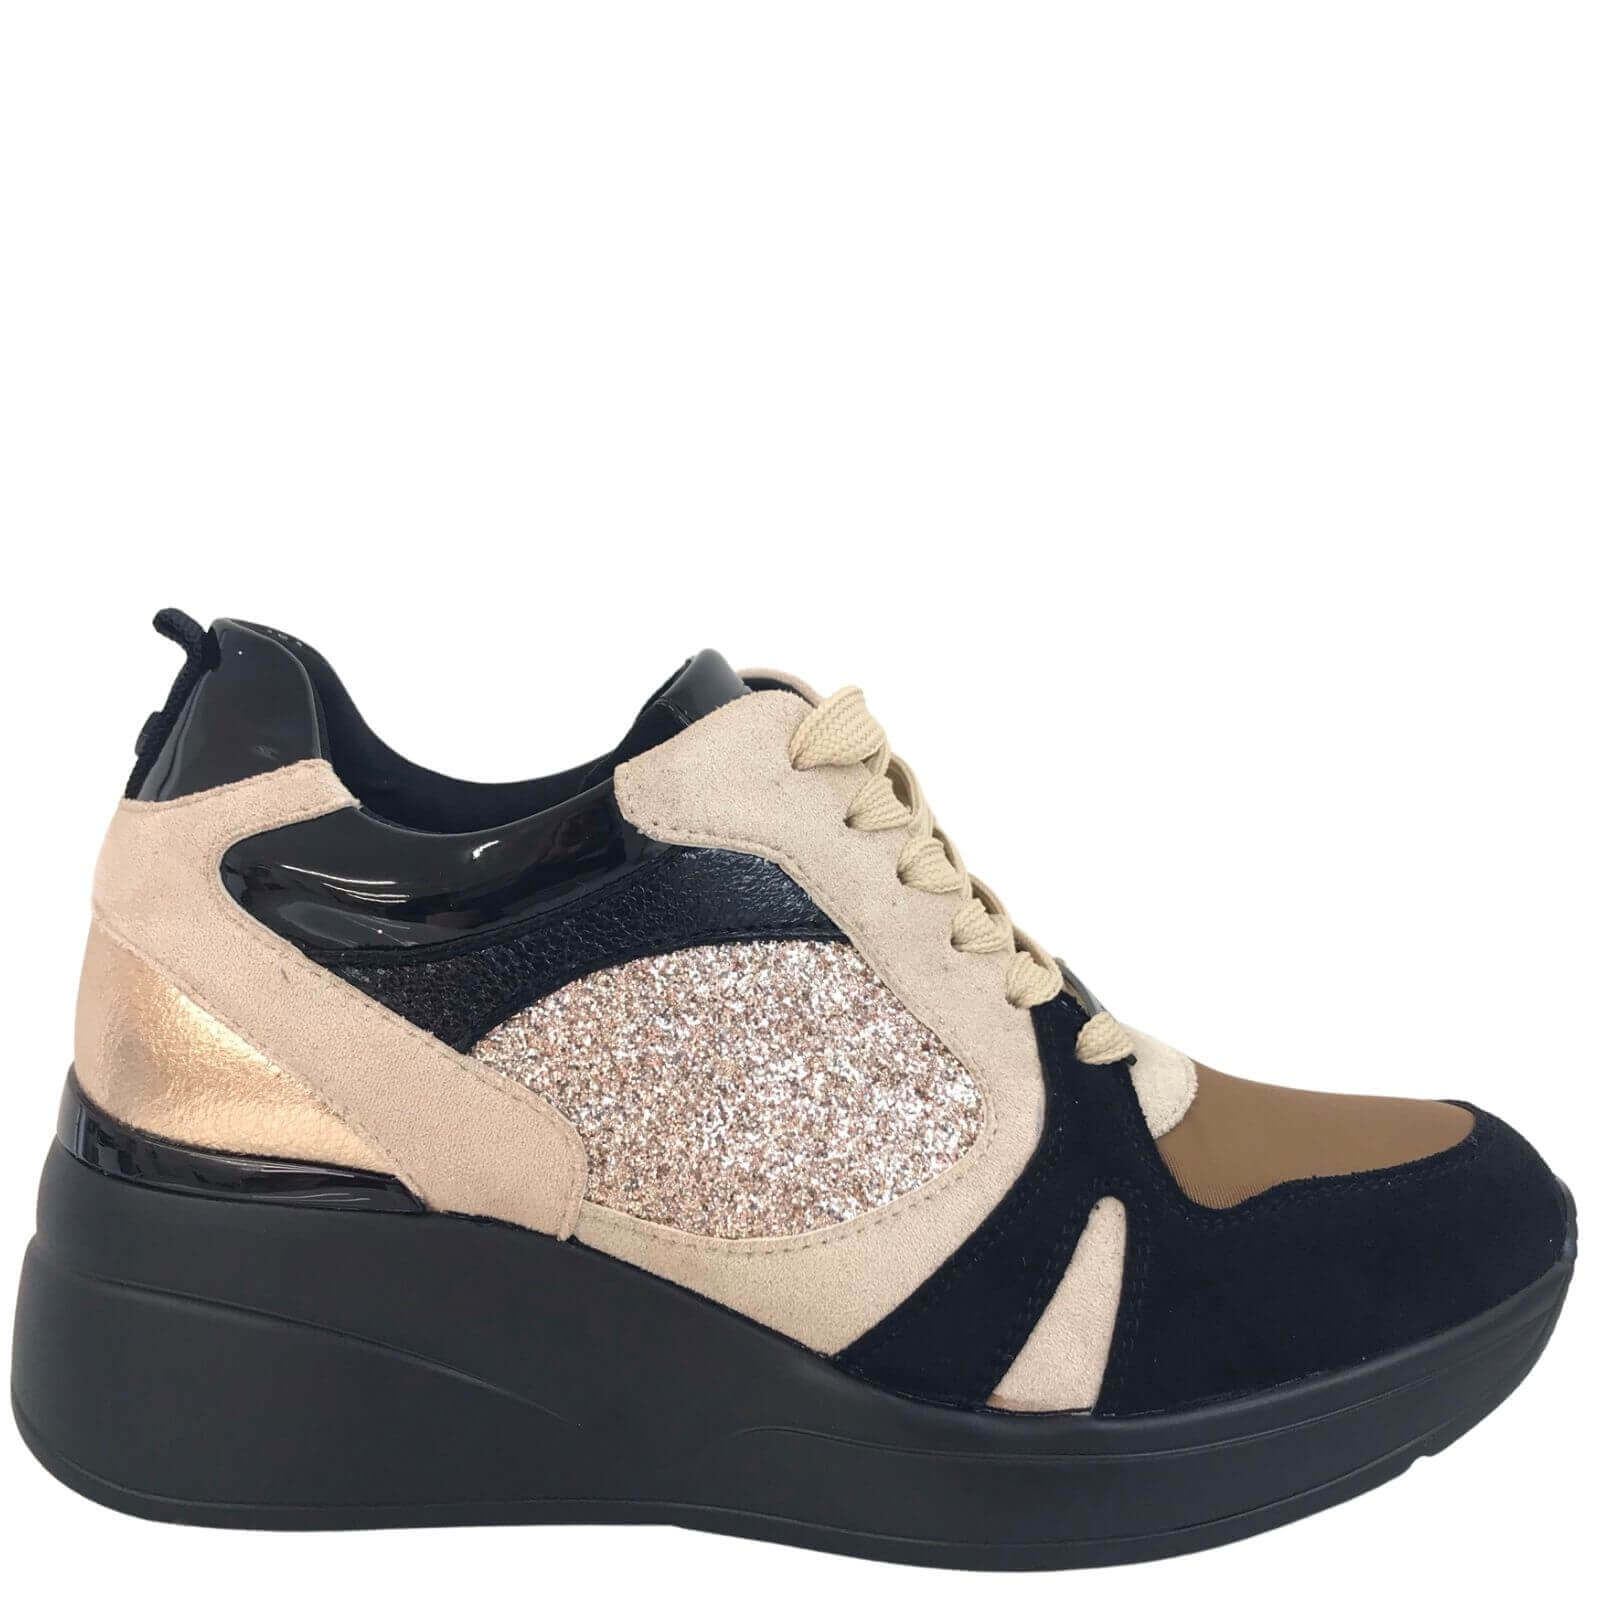 Rose gold wedge sneakers | Womens shoes wedges, High heel sneakers, Wedge  sneakers